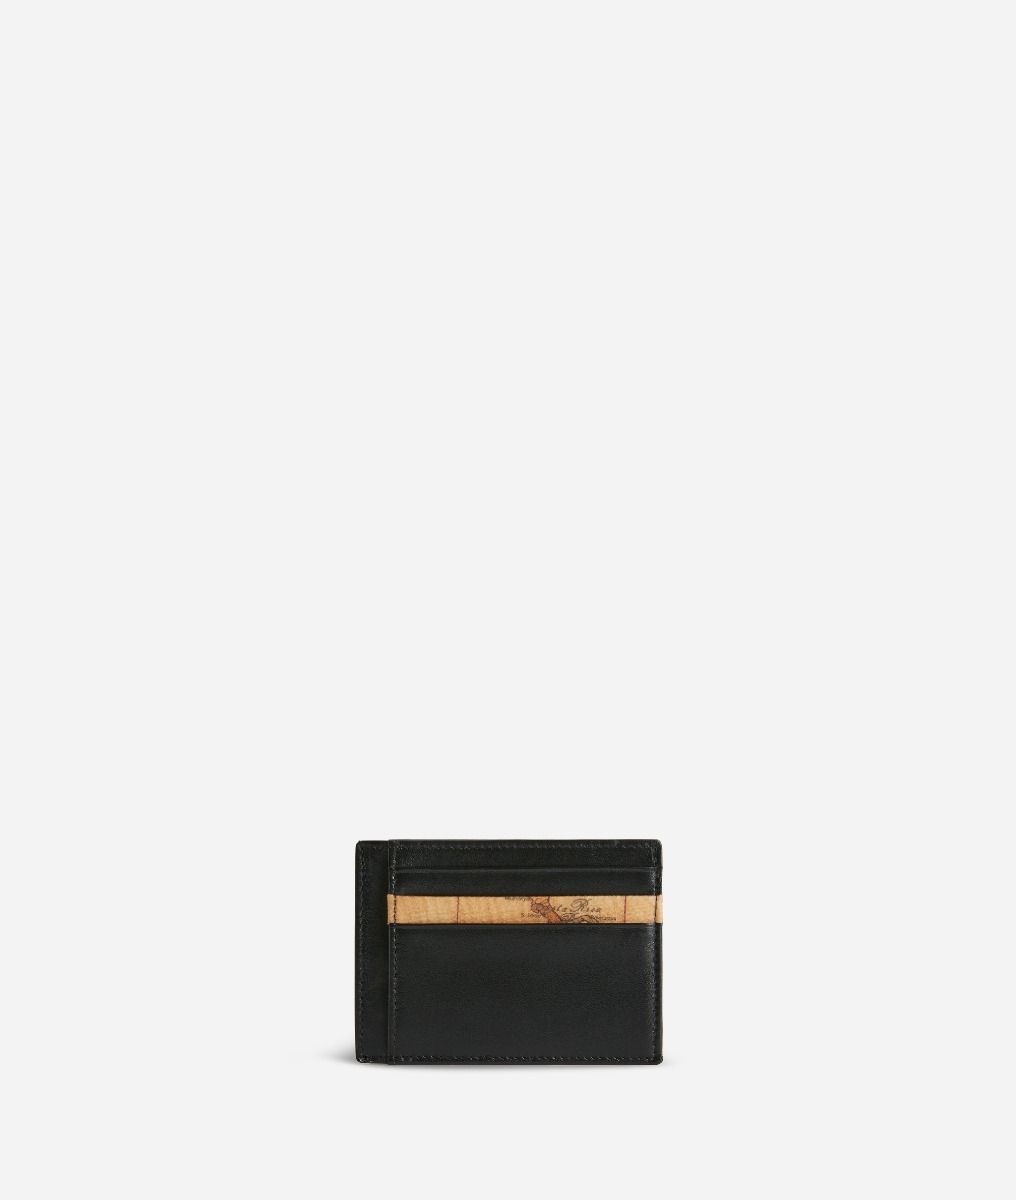 Geo Classic small card holder in leather black,front